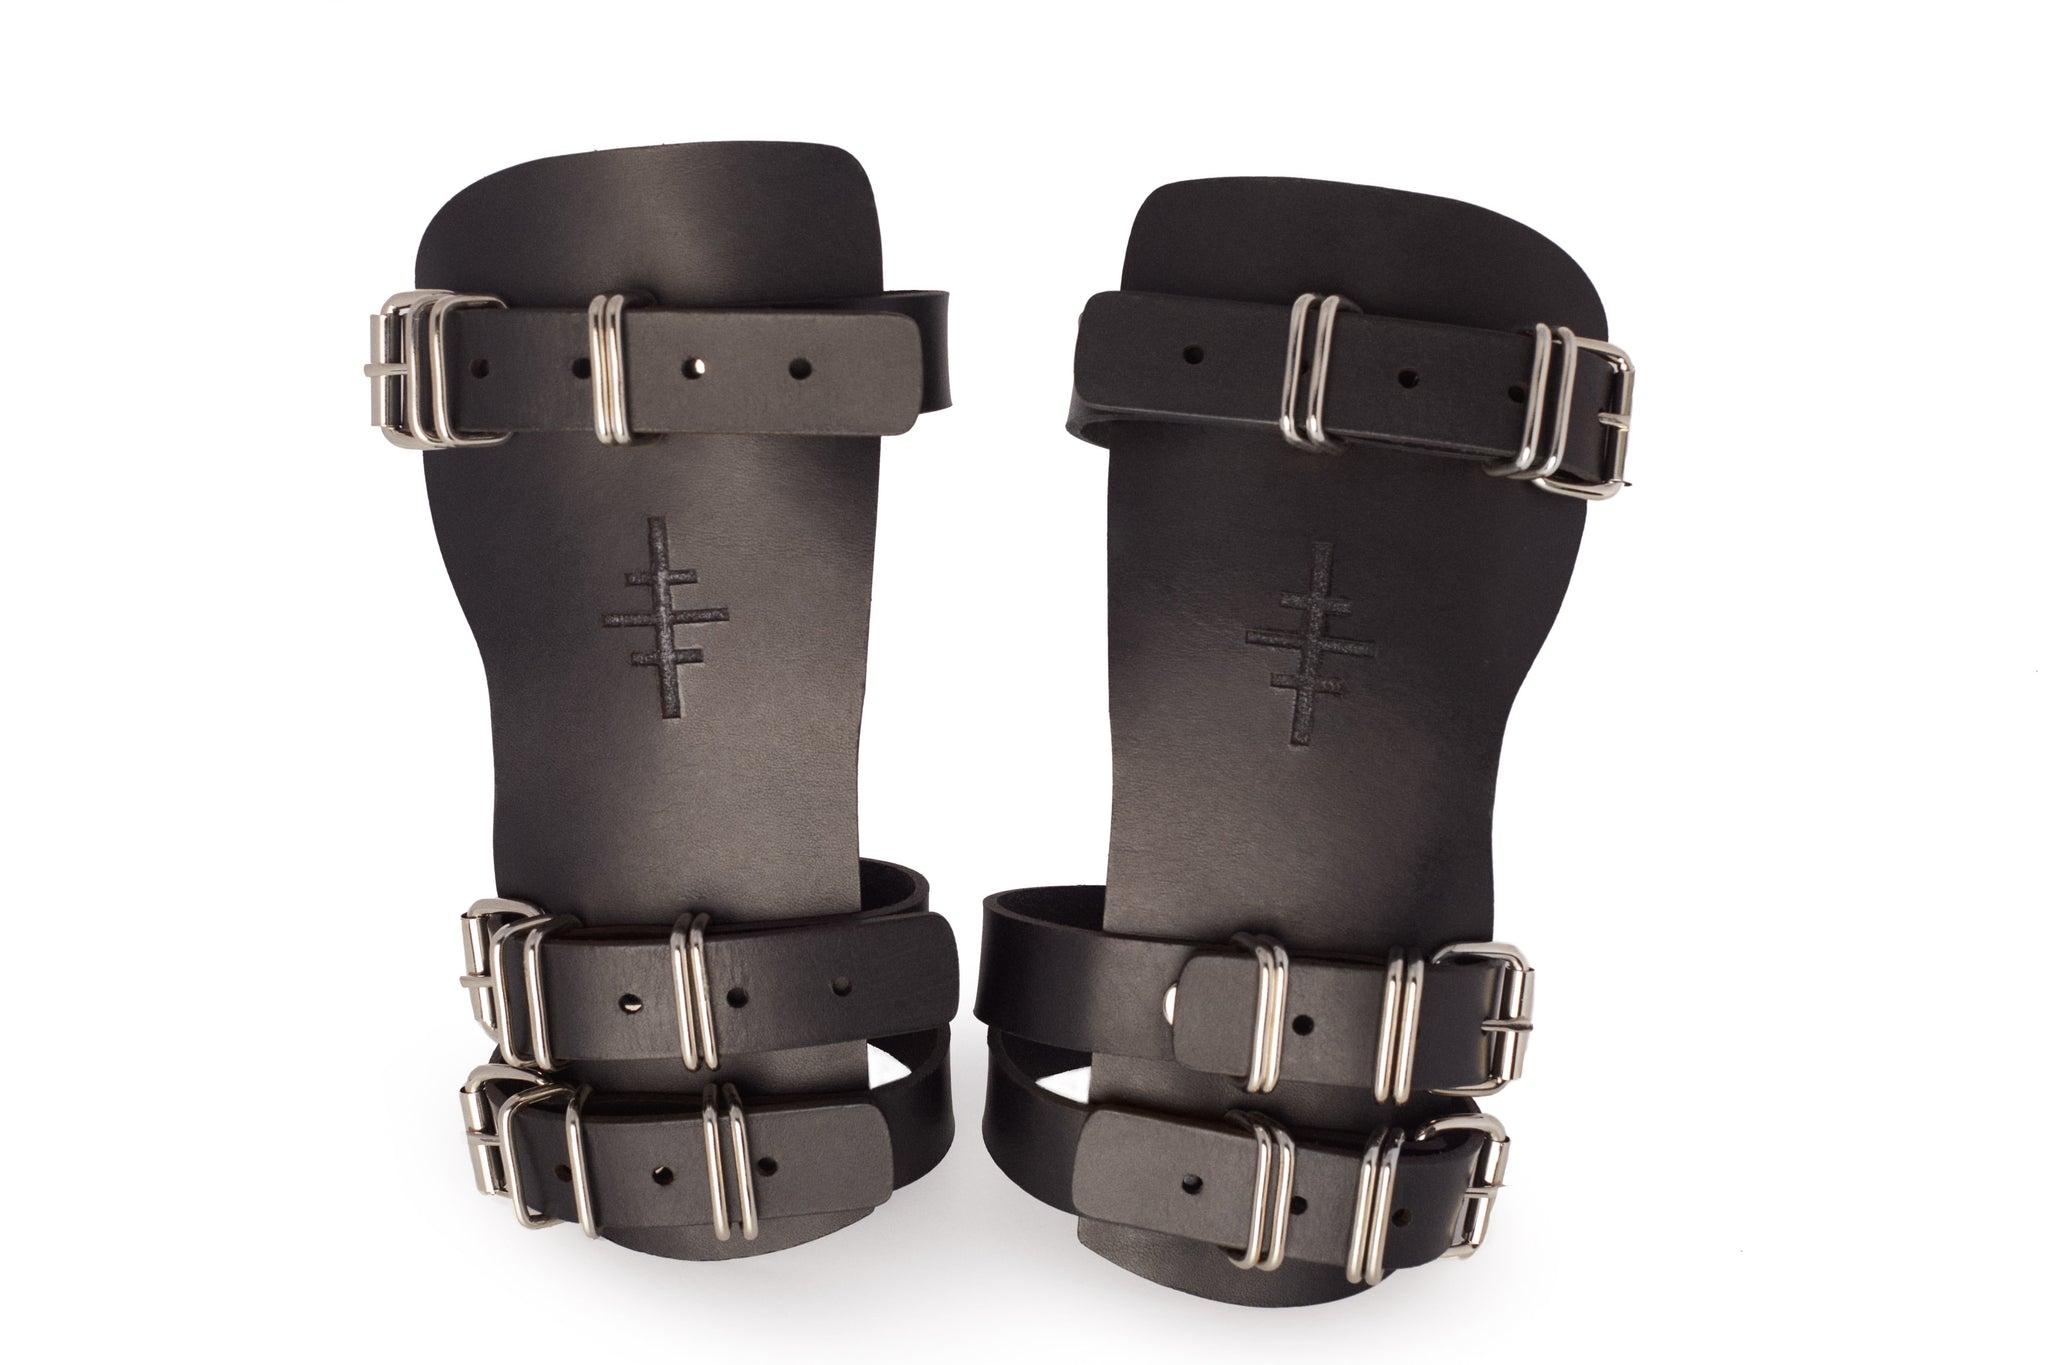 APEPIS leather hand-straps